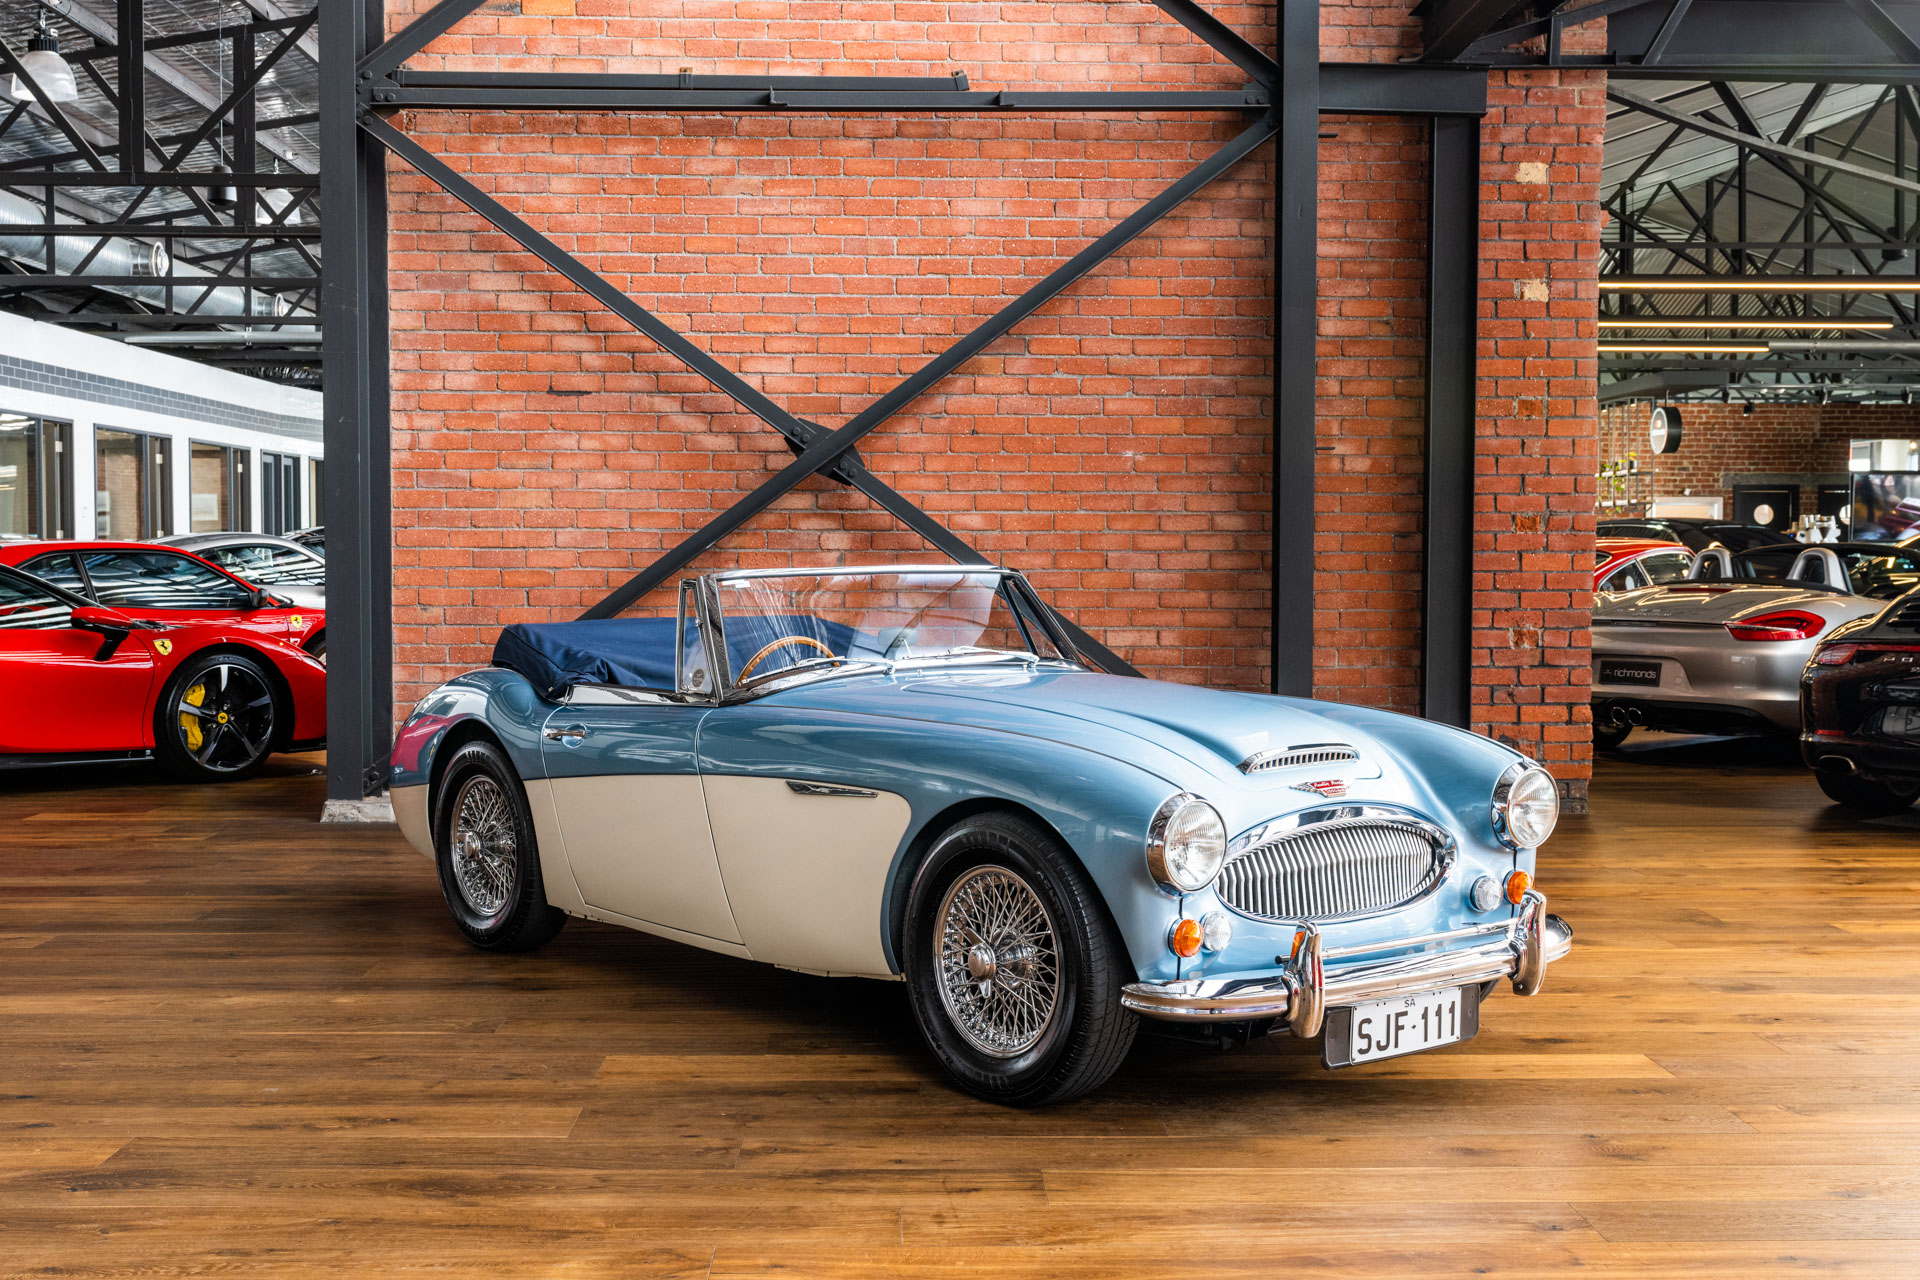 1966 Austin Healey 3000 MkIII BJ8 Convertible - Richmonds - Classic and Prestige Cars - Storage and Sales picture